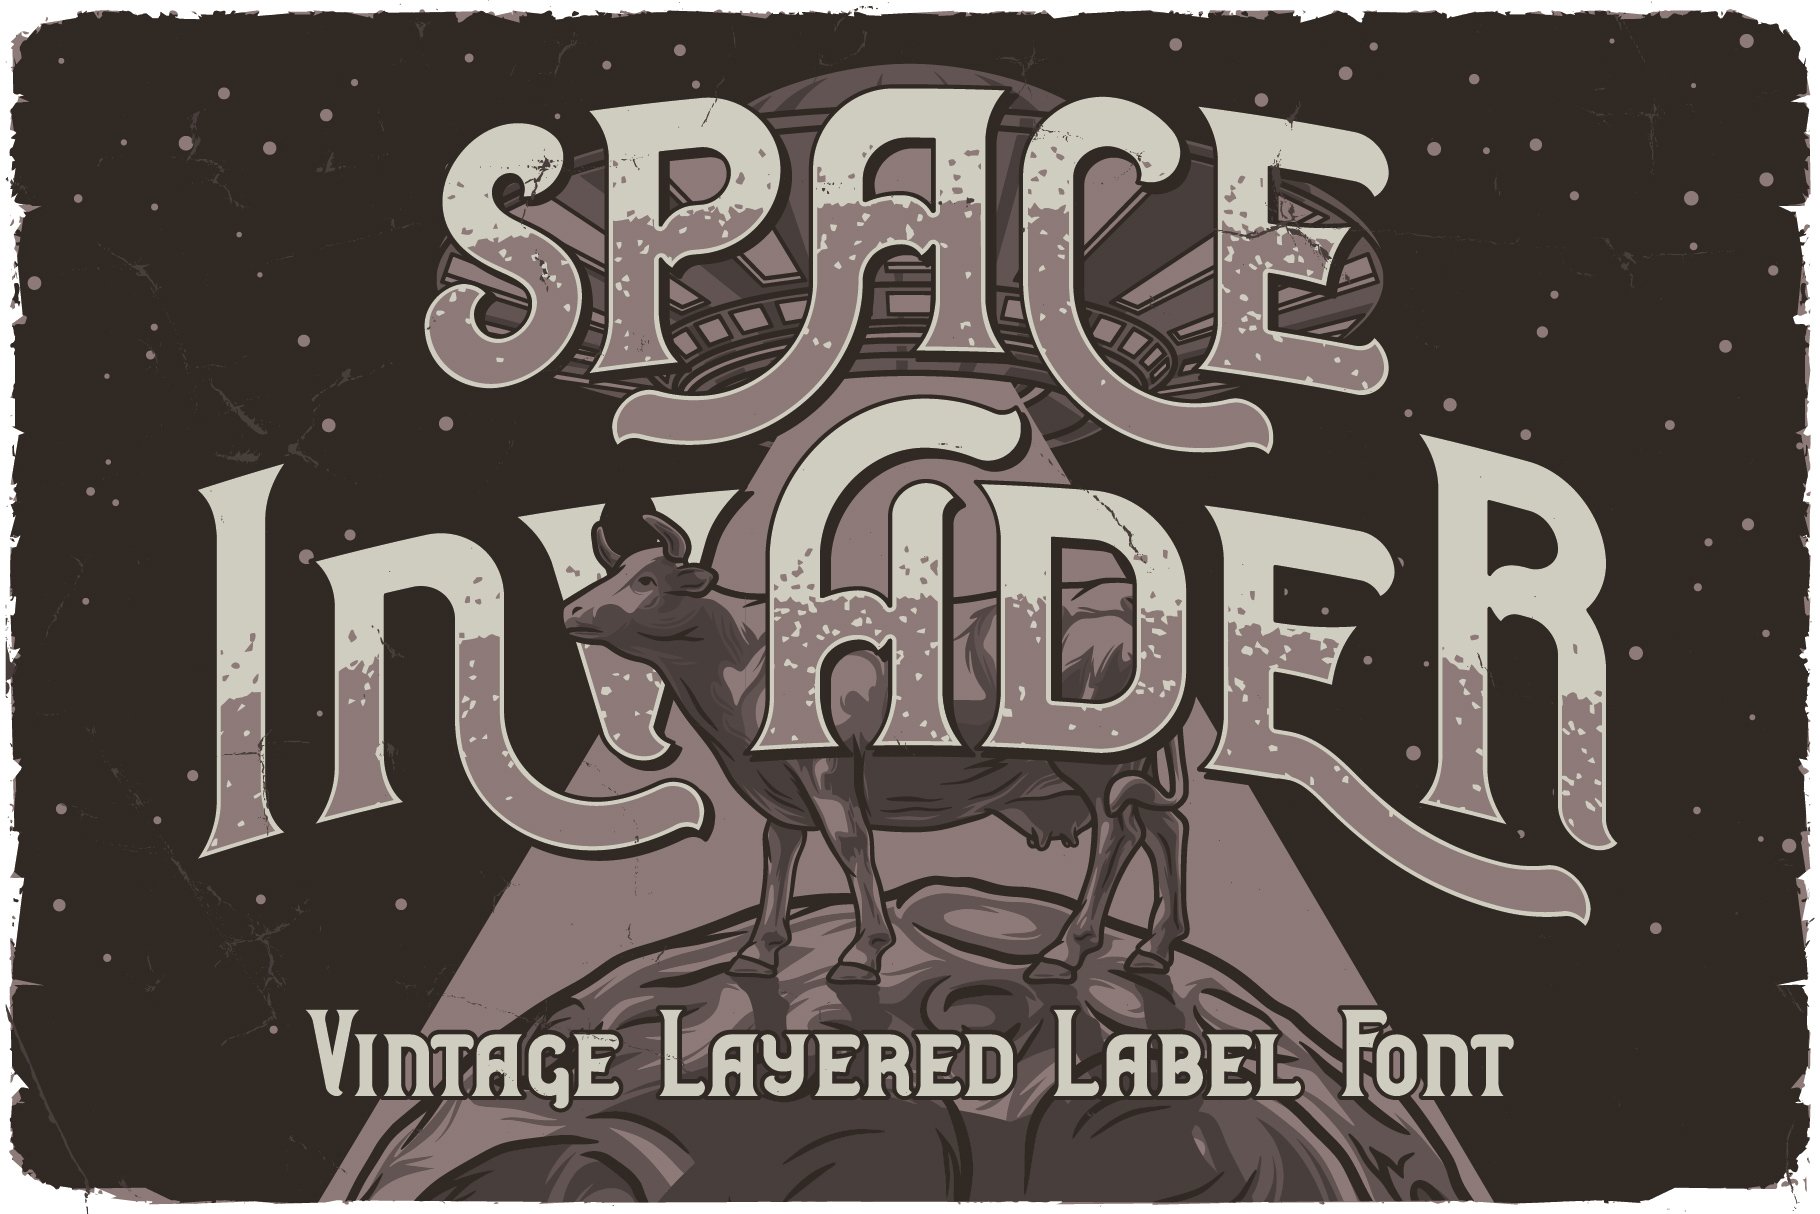 Space Invader Layered Font cover image.